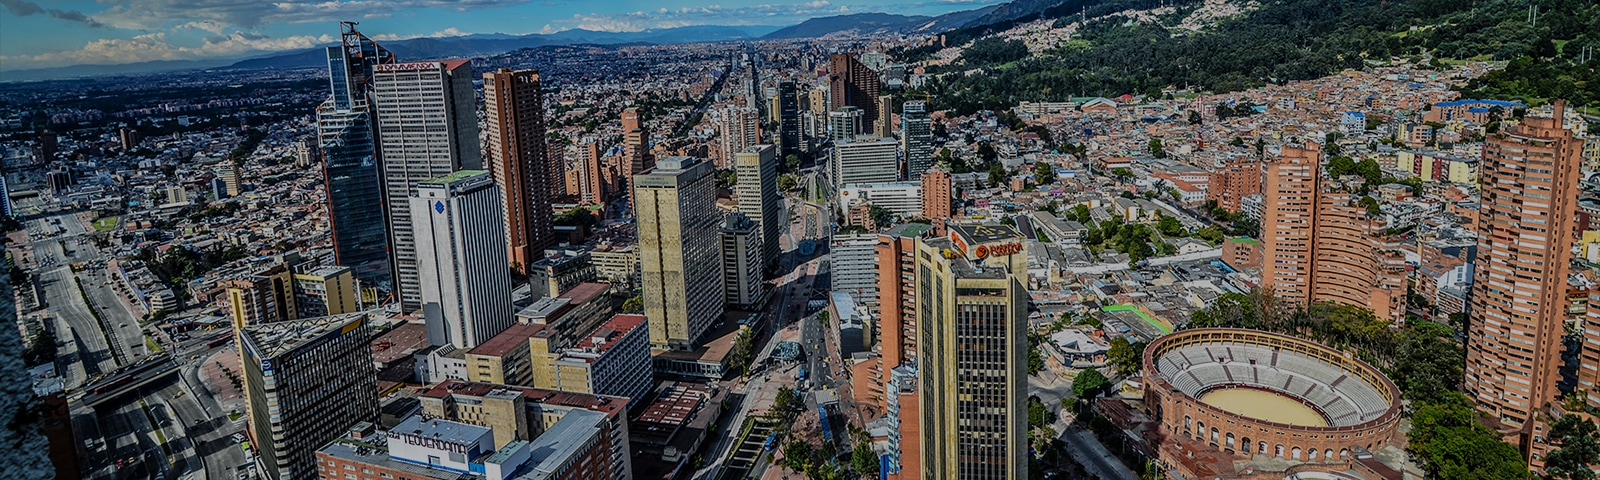 Colombia Country Digital Acceleration